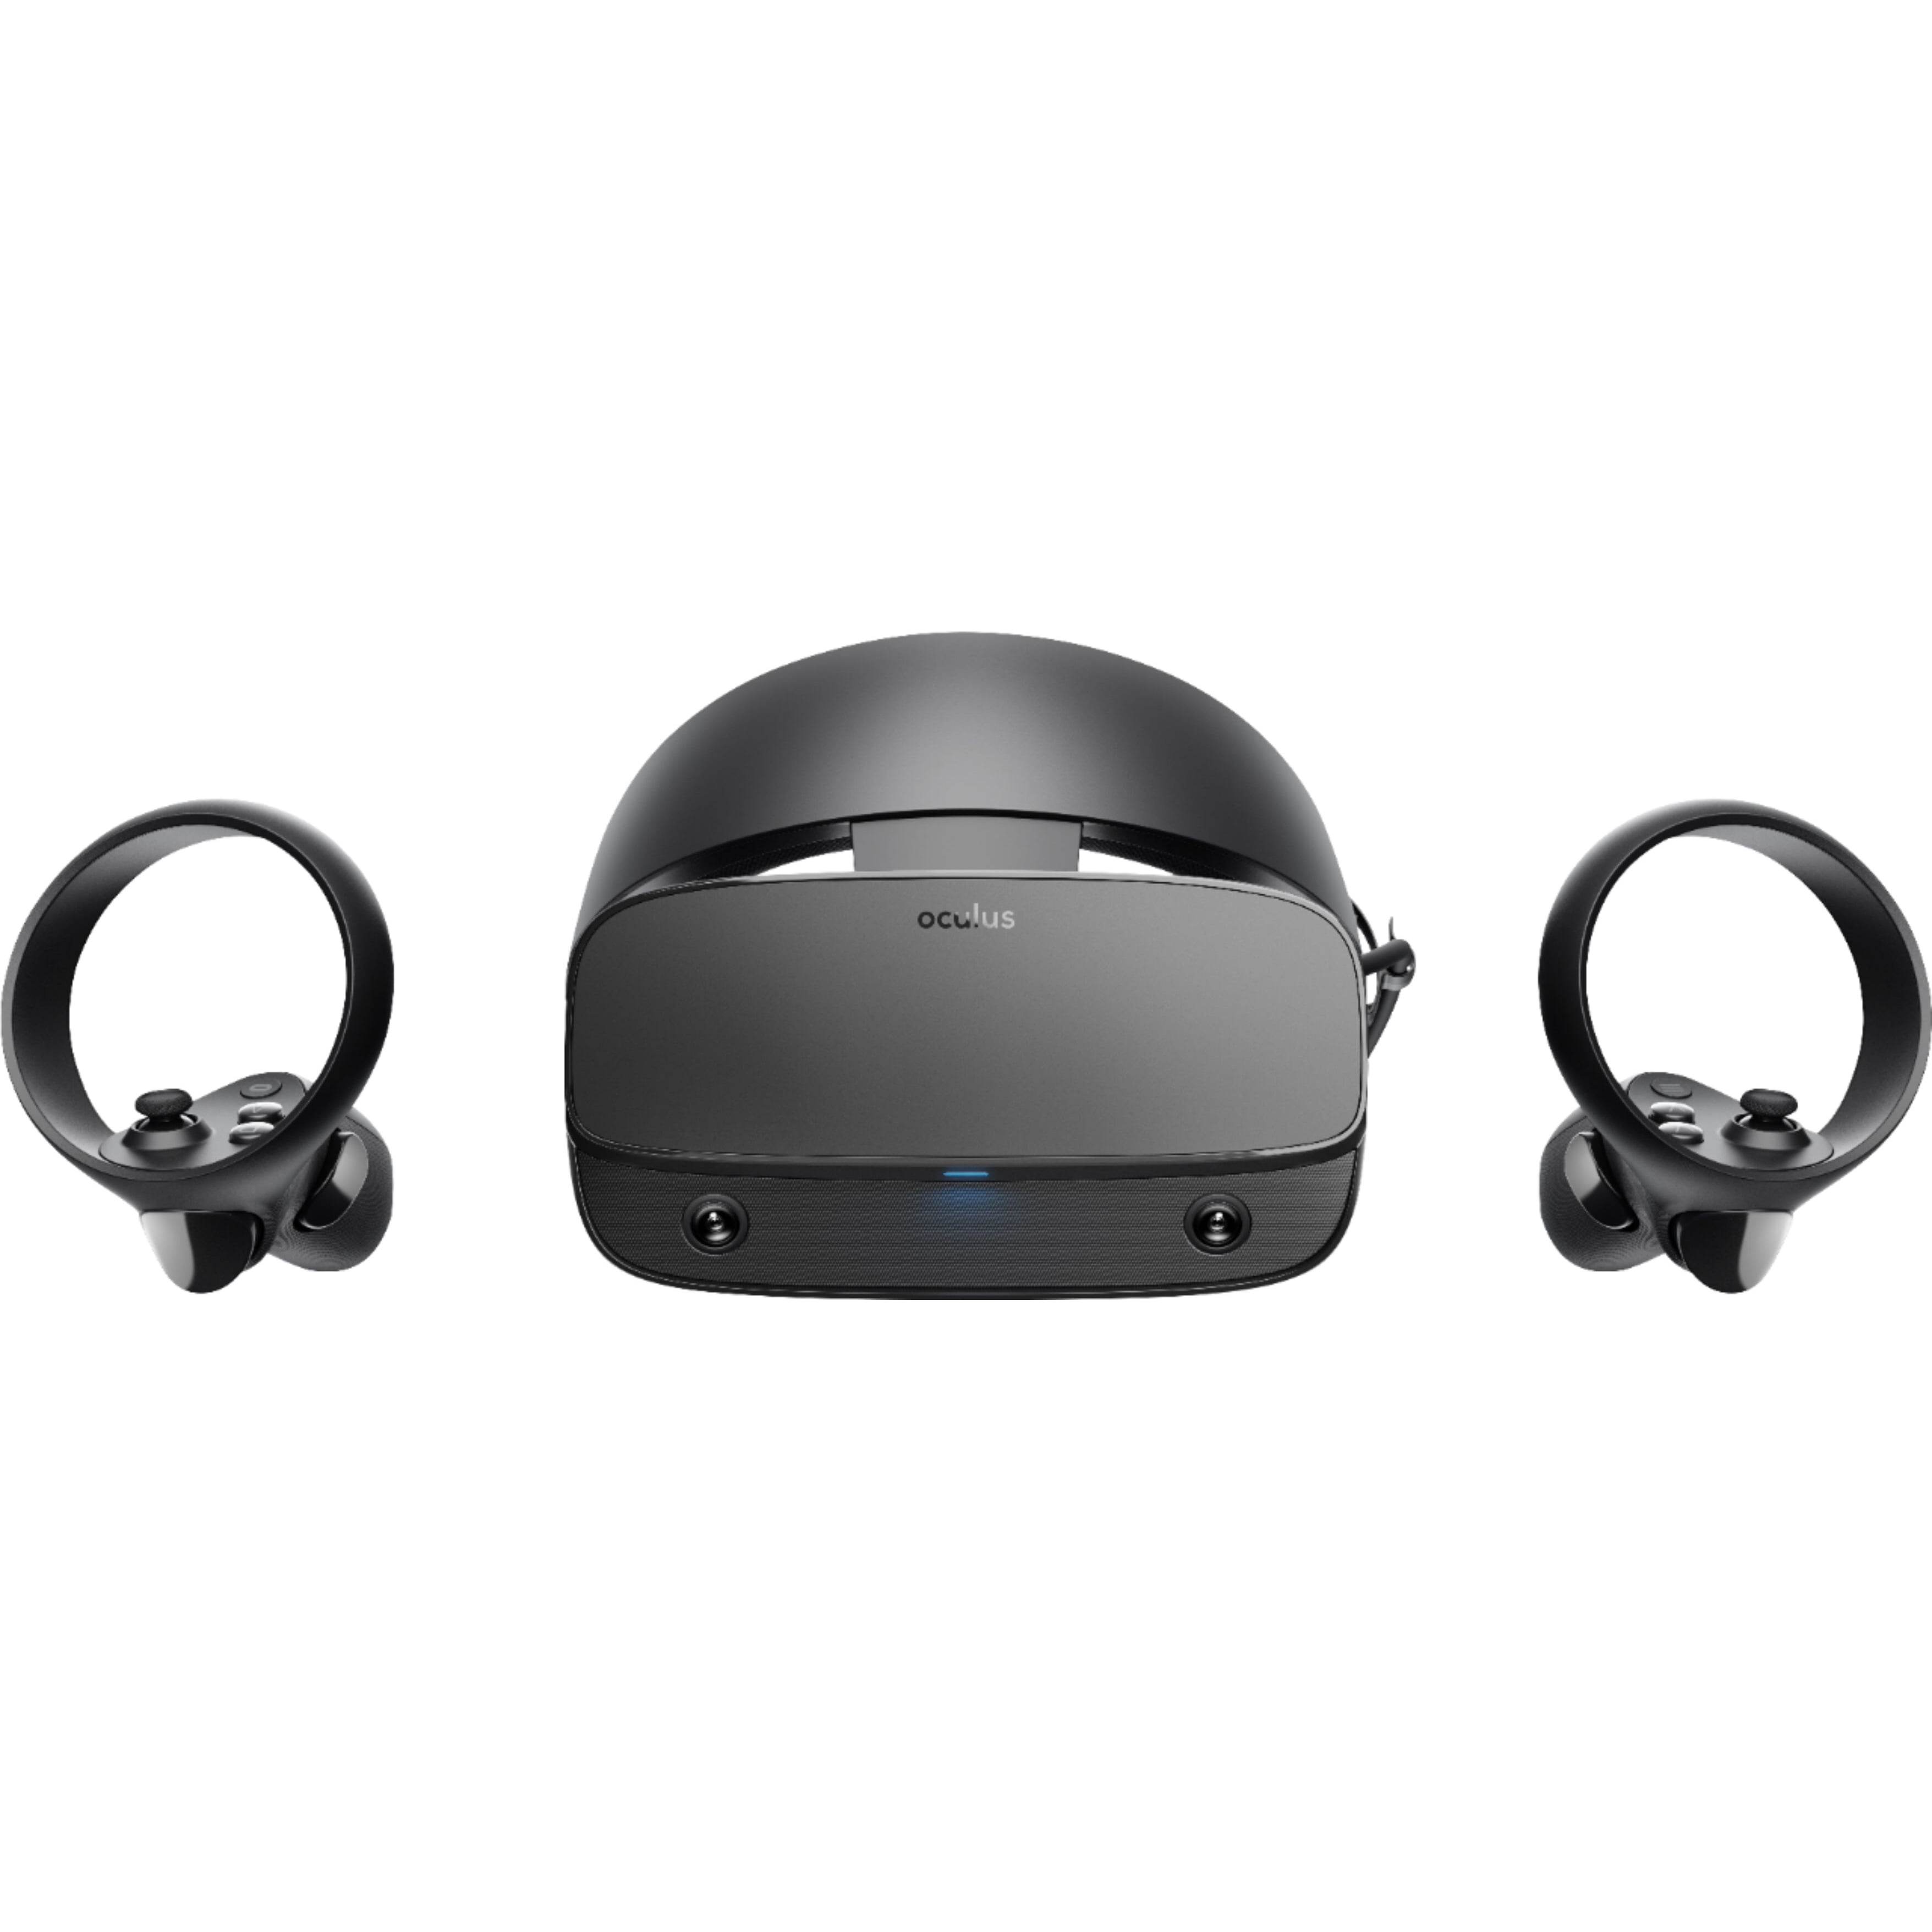 Oculus - Rift S PC-Powered VR Gaming Headset - Black - Touch Controller, 3D  Positional Audio, Built-in Room-Scale Insight Tracking, Fit Wheel 